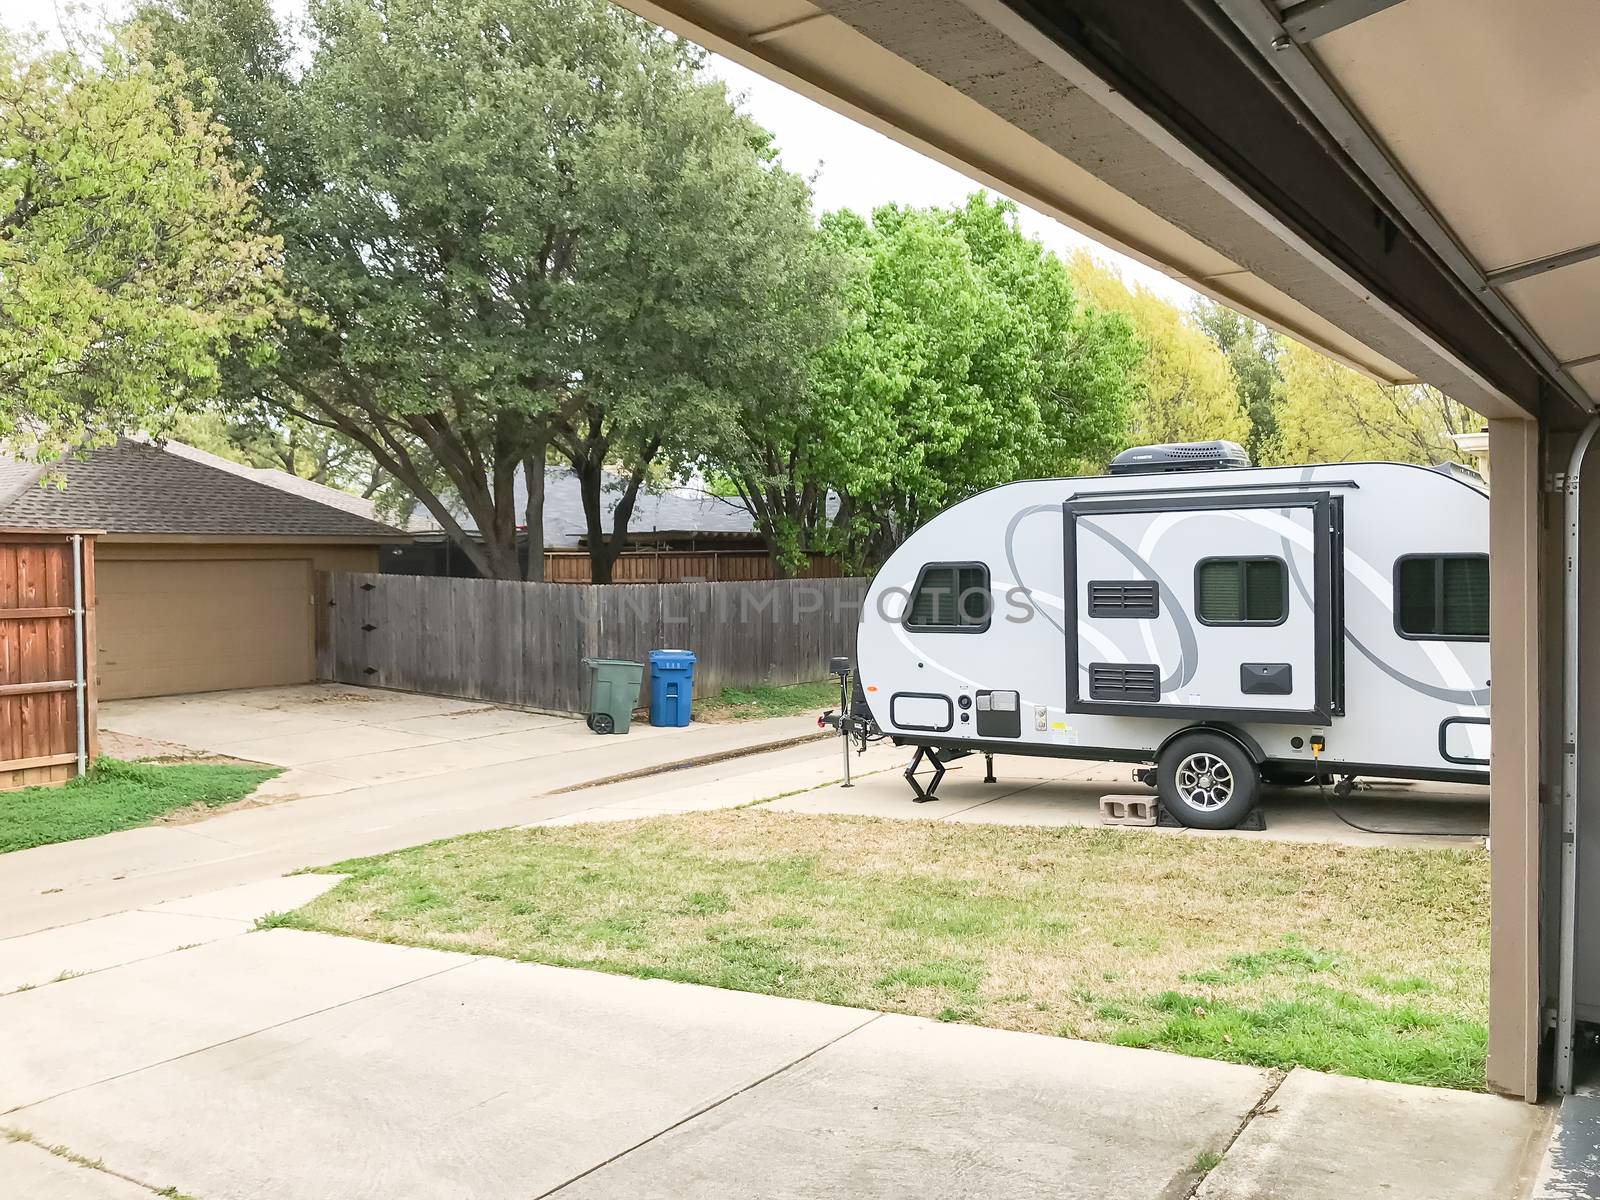 RV trailer parked at backyard, view from inside garage